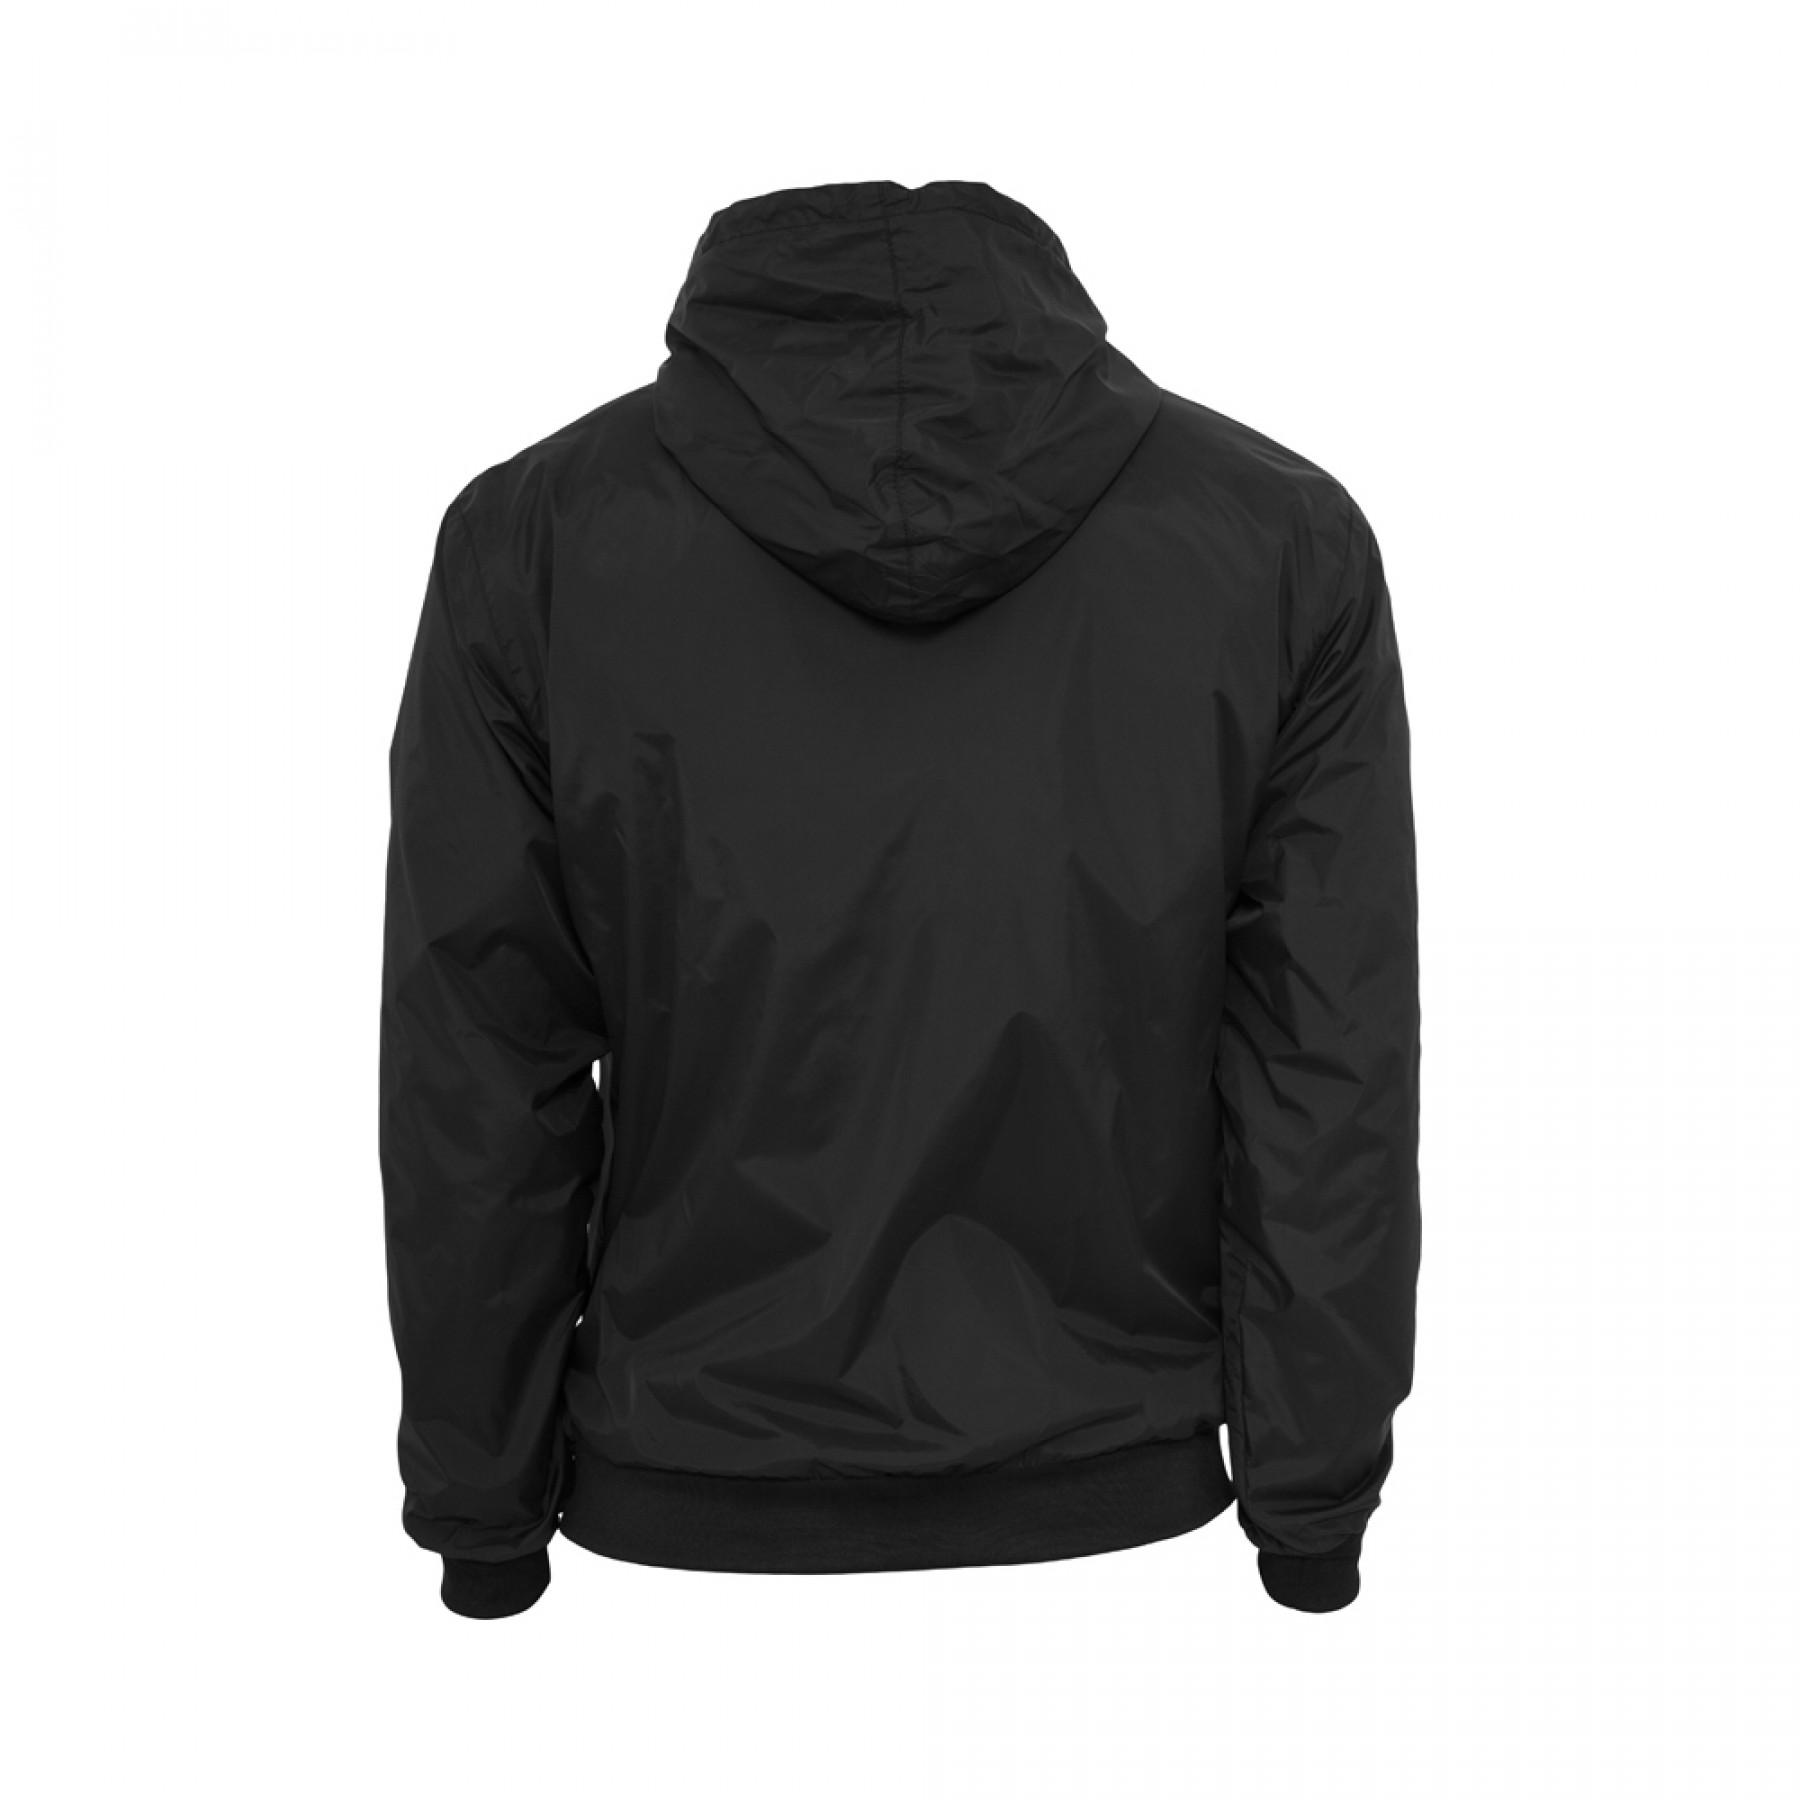 Urban Classic windstopper basic contract